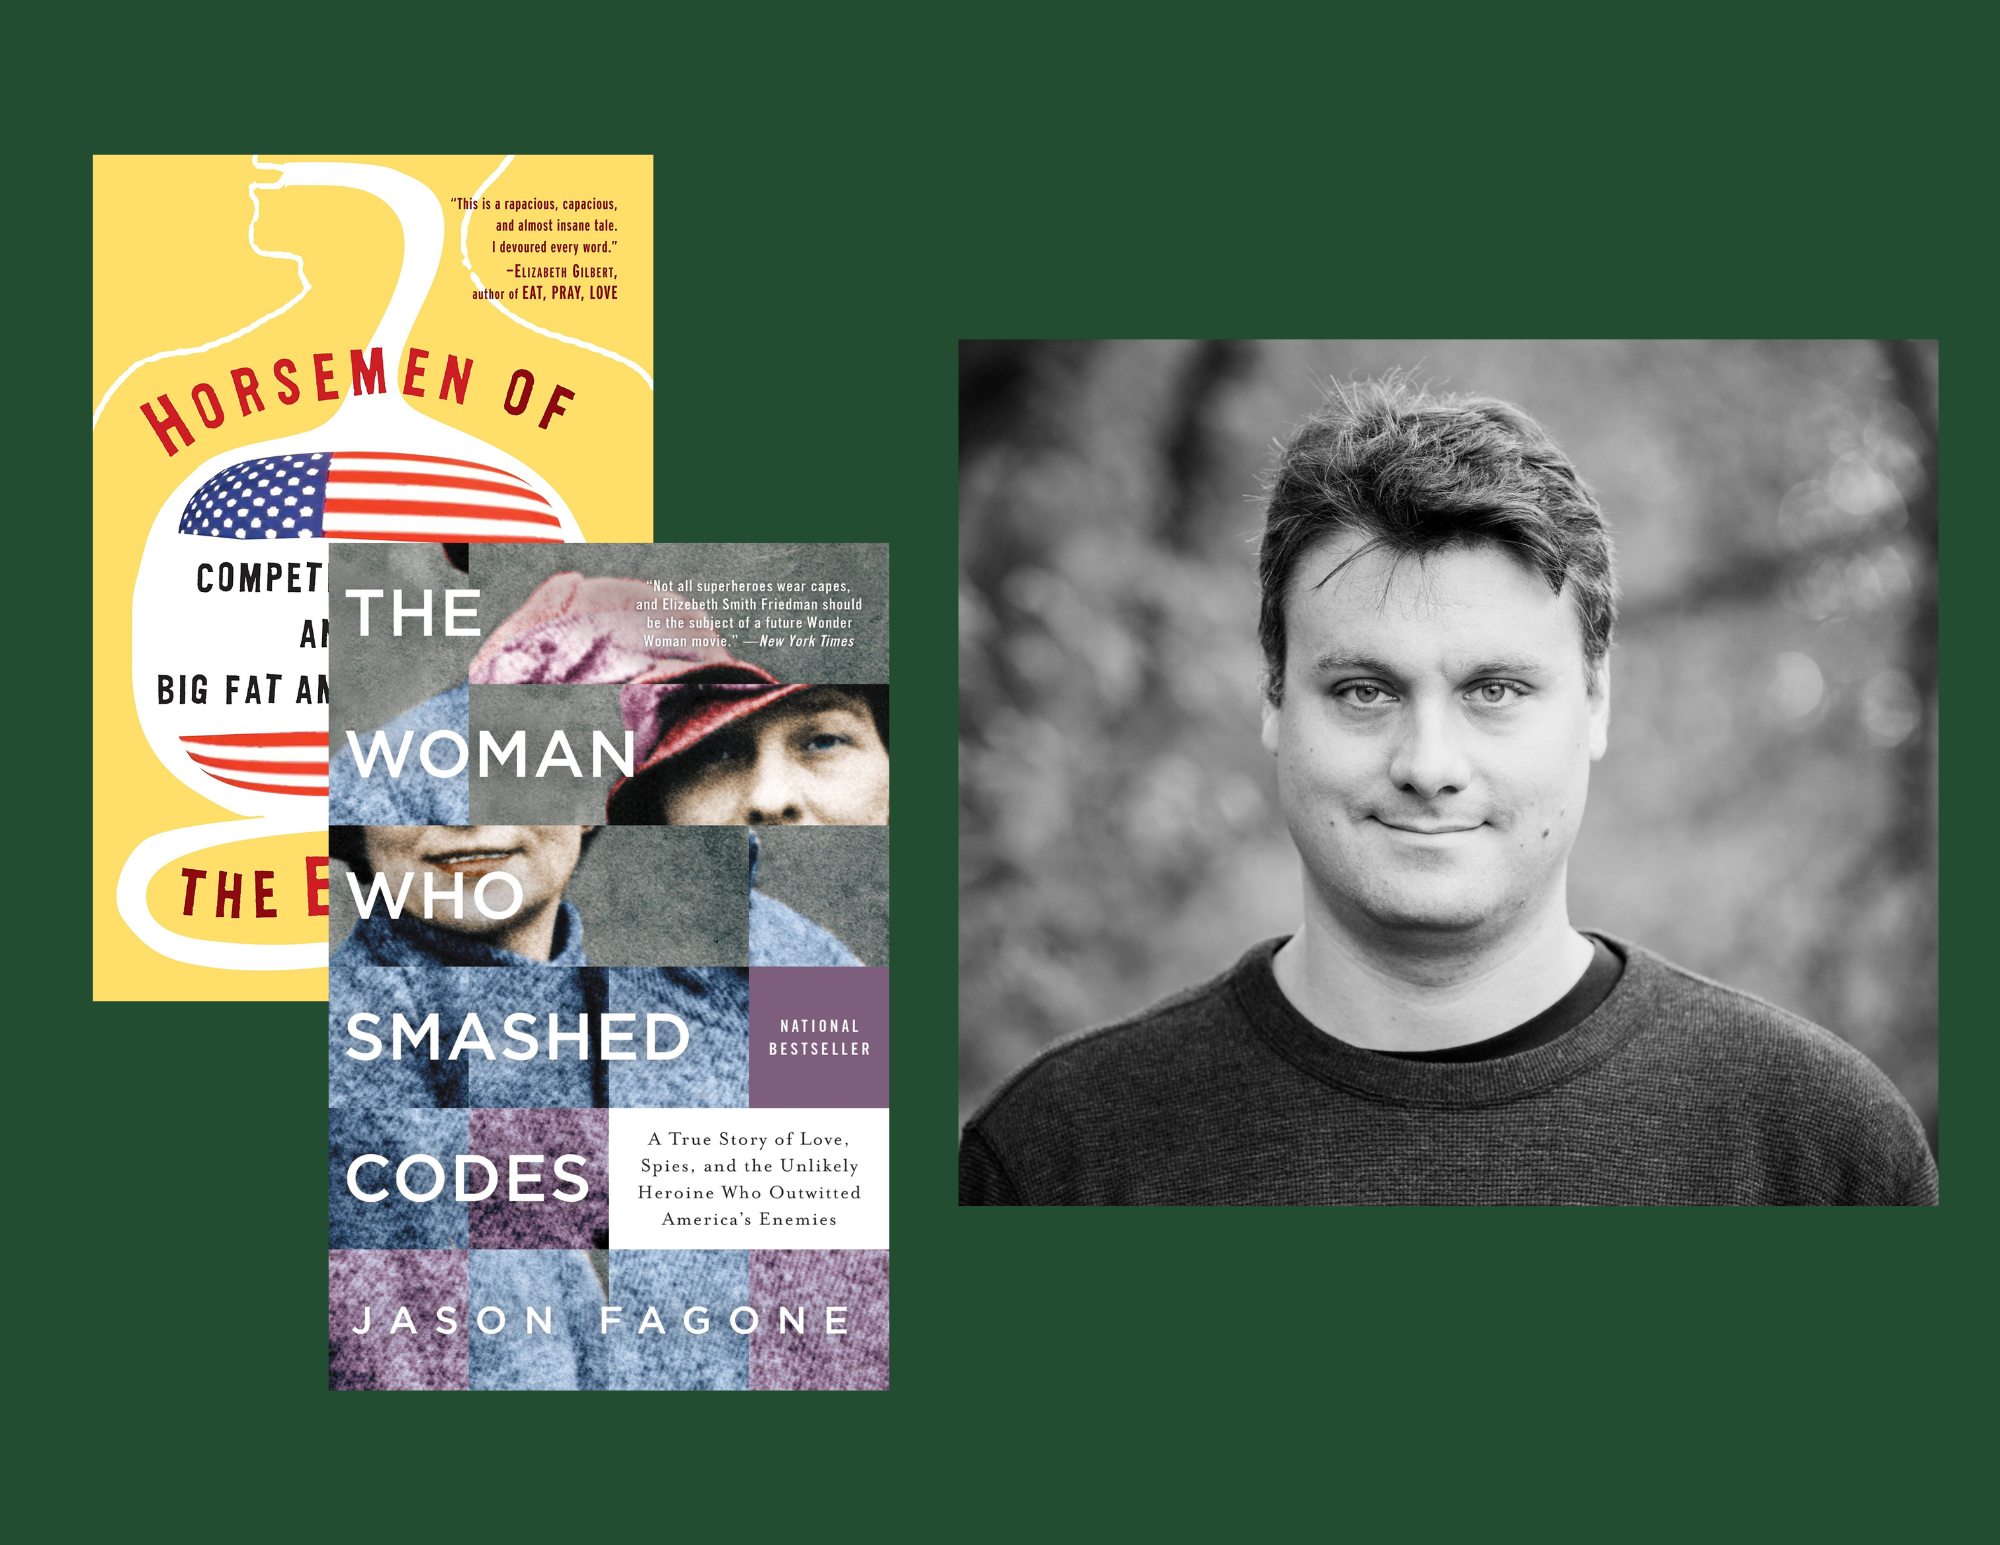 Jason Fagone on Investigative Journalism and Writing Nonfiction